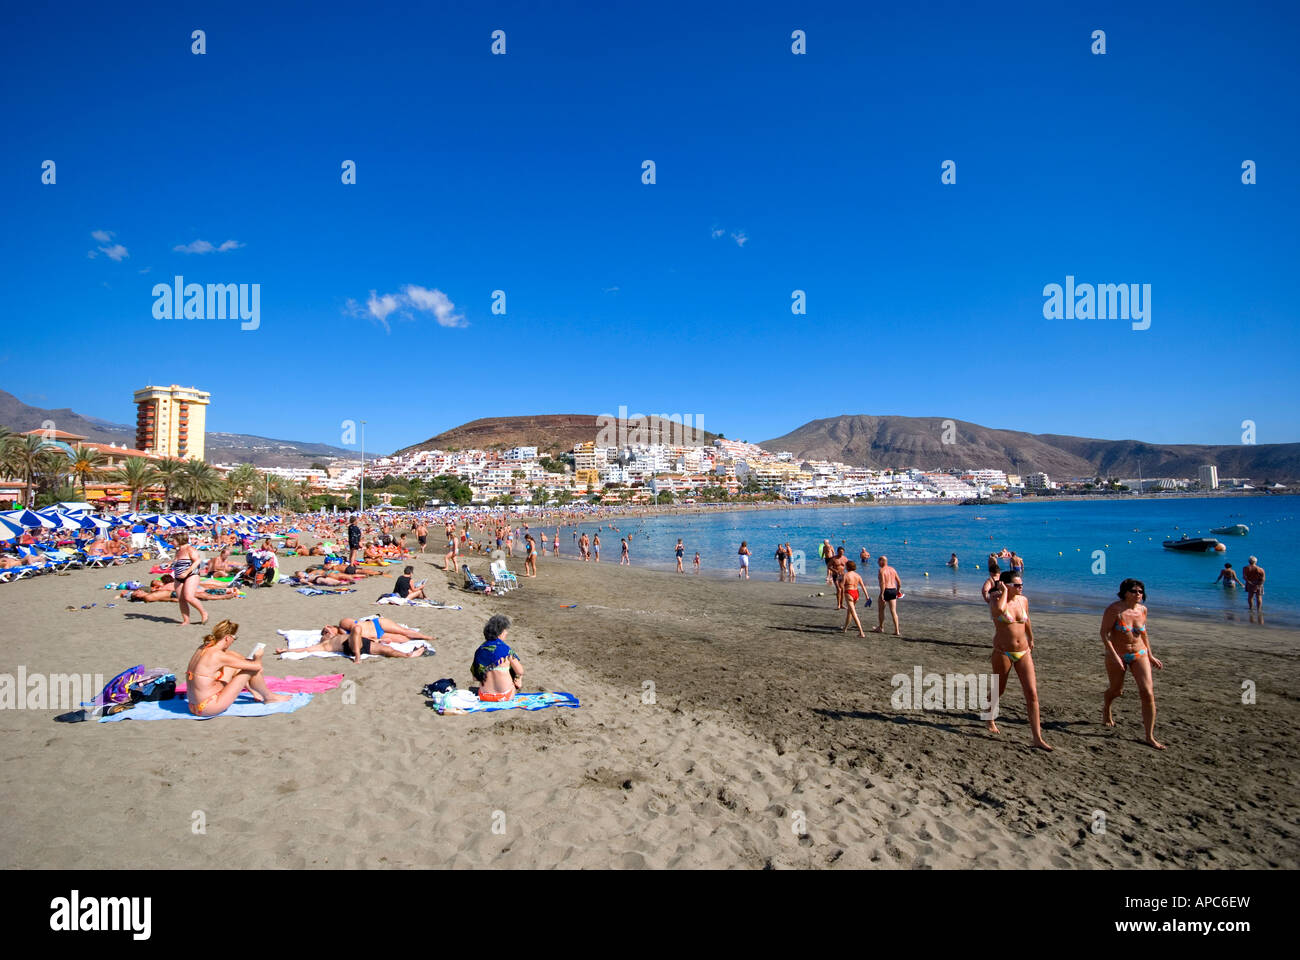 Playa de Las Vistas in Los Cristianos, Tenerife island, is considered one  of the best beaches of the Canary Islands, Spain Stock Photo - Alamy